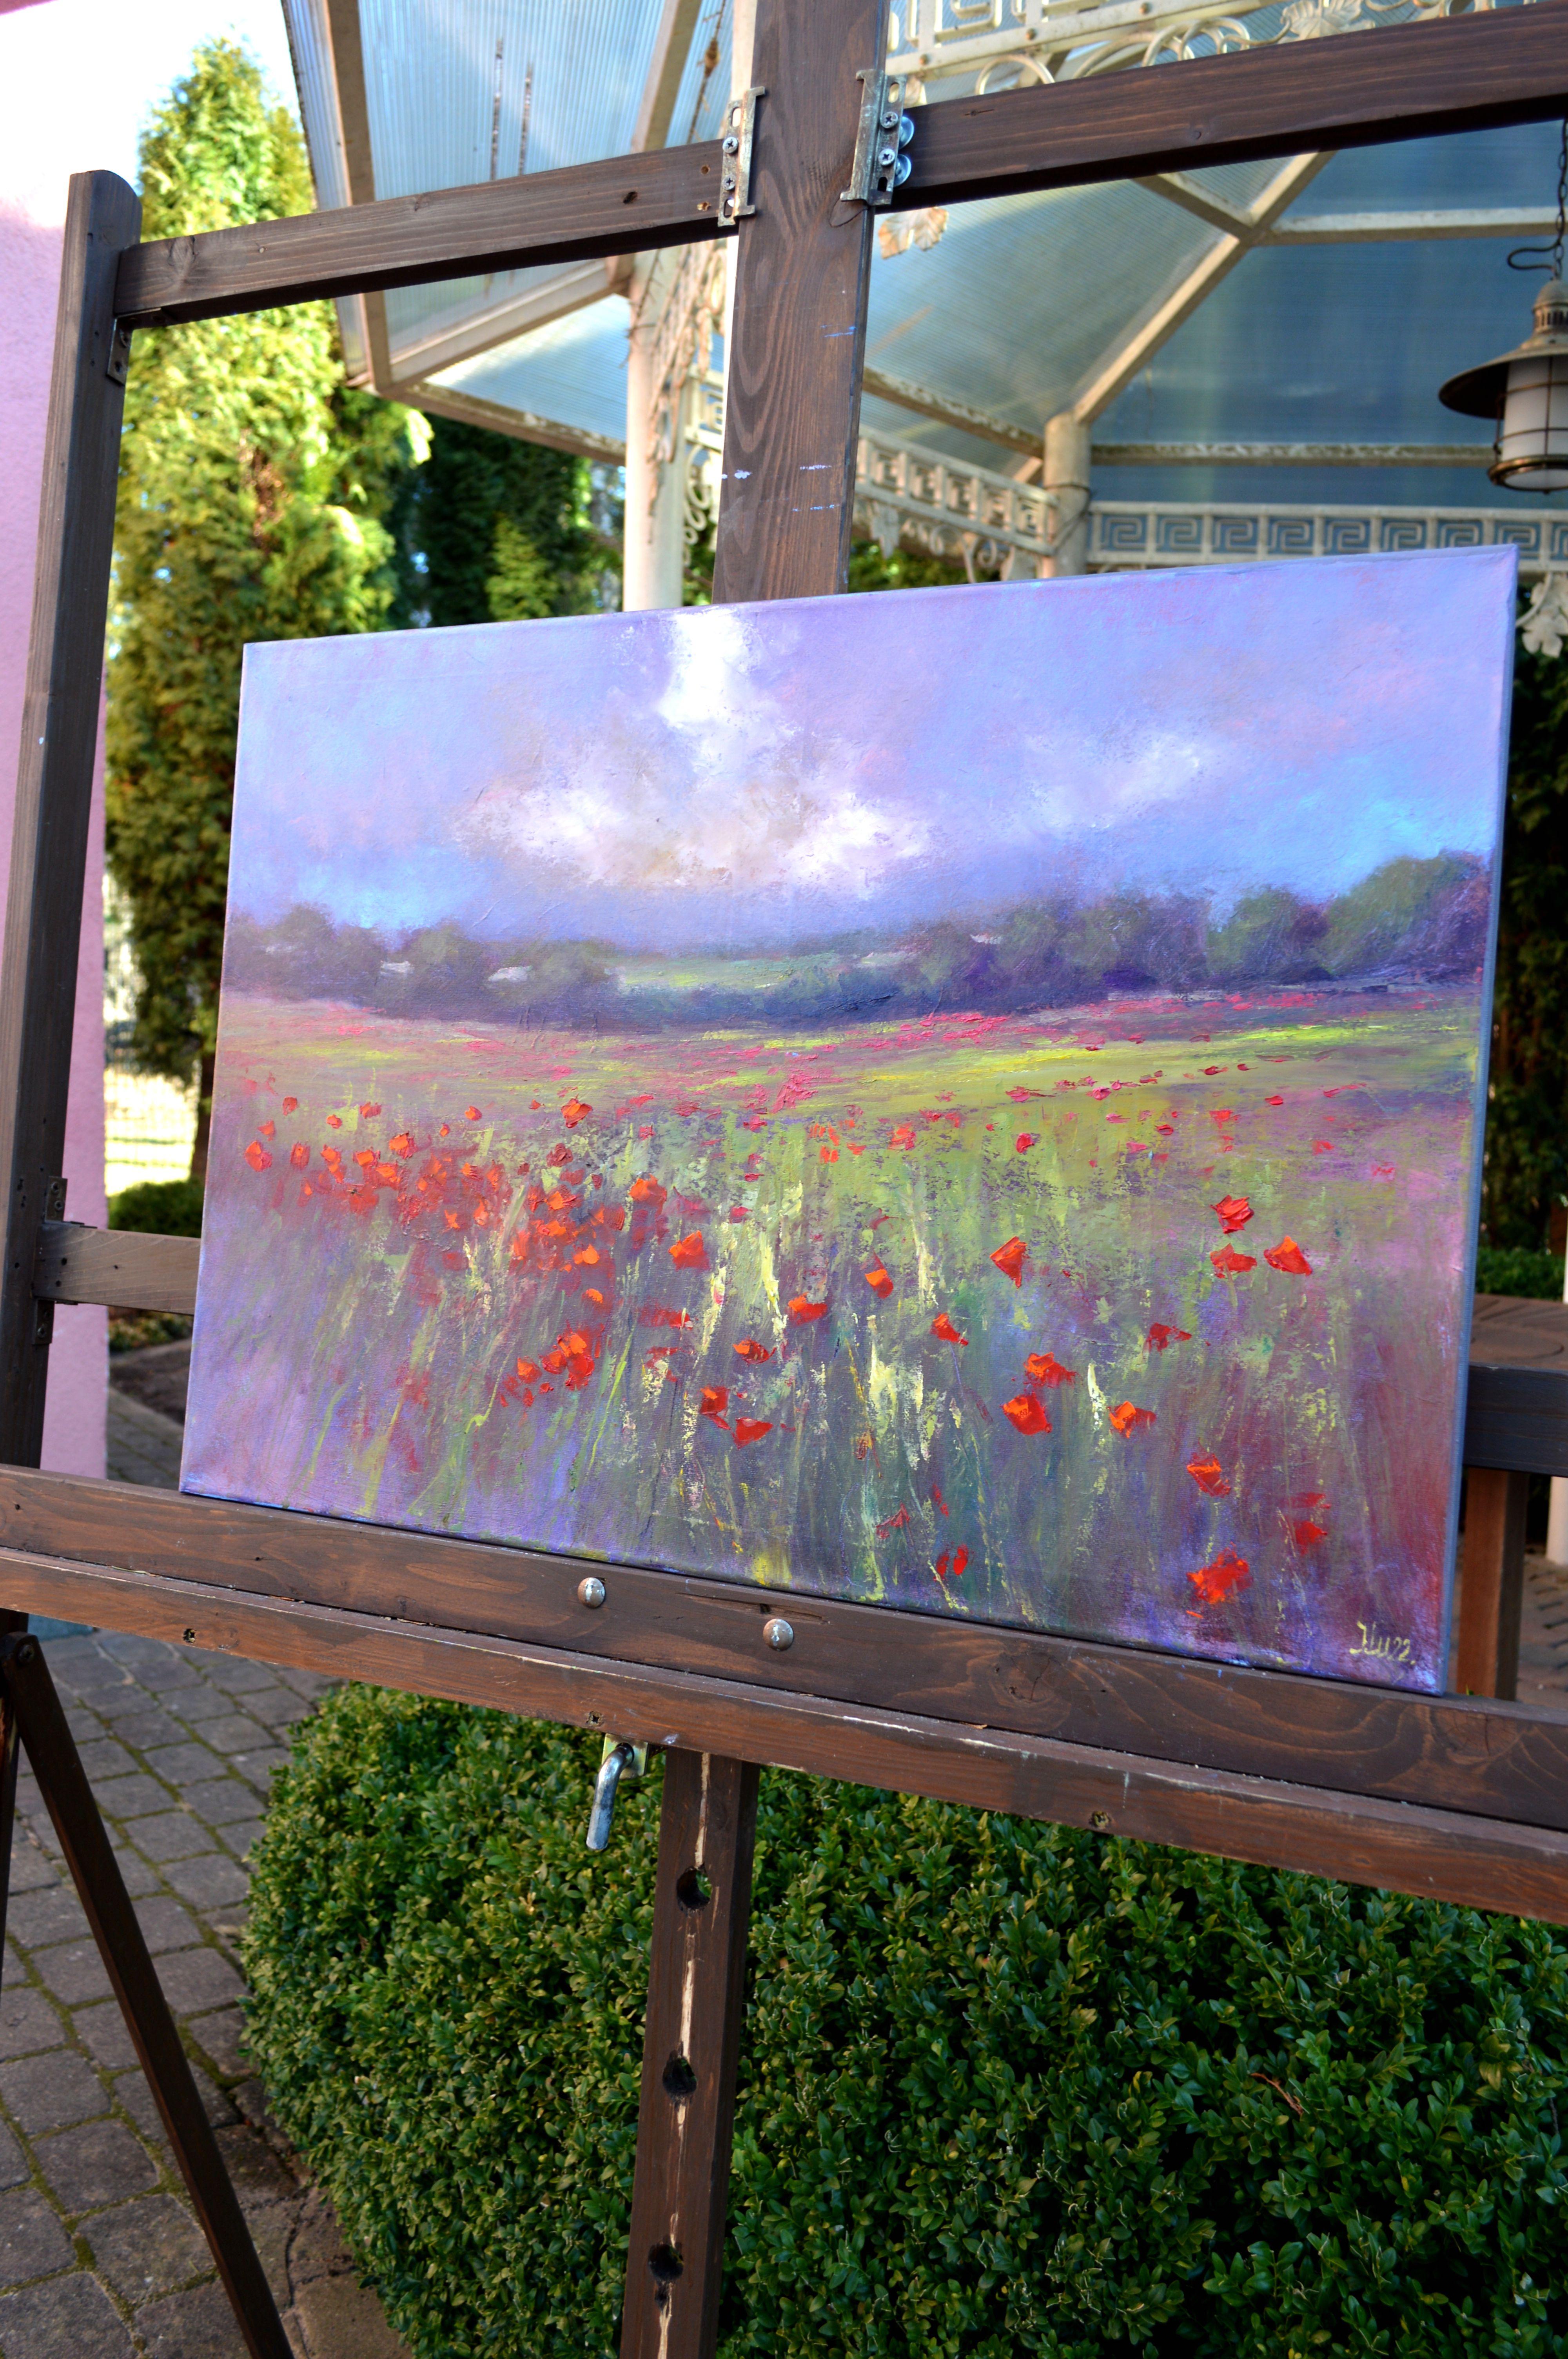 In this piece, I've embraced the vivid, pulsating life of nature, capturing the wild, untamed energy of a poppy field. The strokes of oil paint bring out an almost tactile experience, bridging the gap between expressionism and impressionism, with